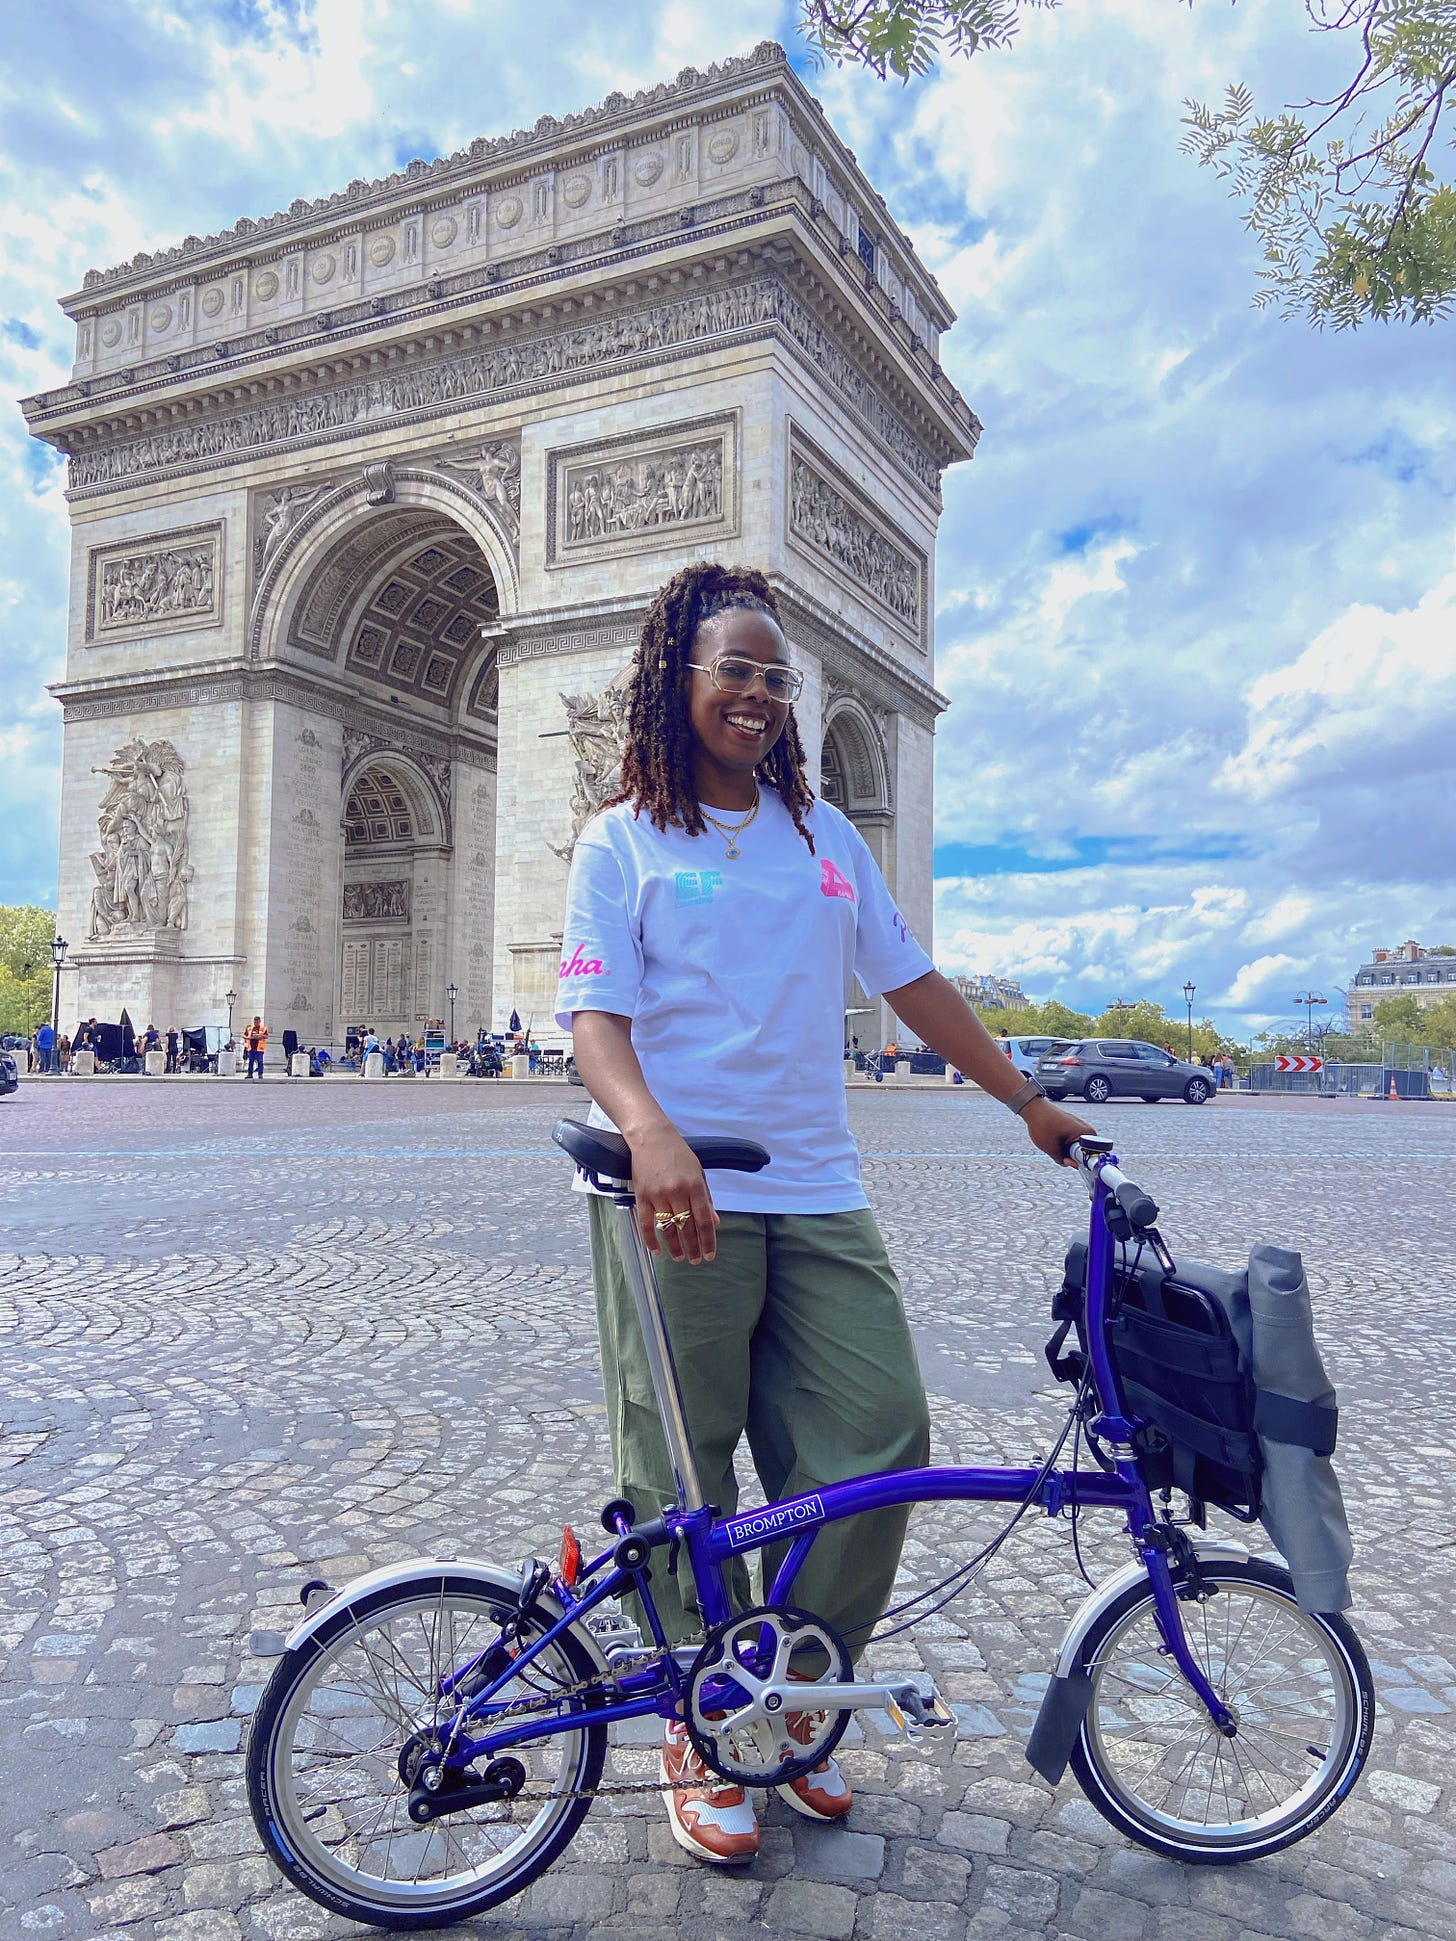 Jools is standing in front of the arc de triomphe in Paris, holding her purple brompton bicycle. She is wearing a white t-shirt and green trousers and smiling. 